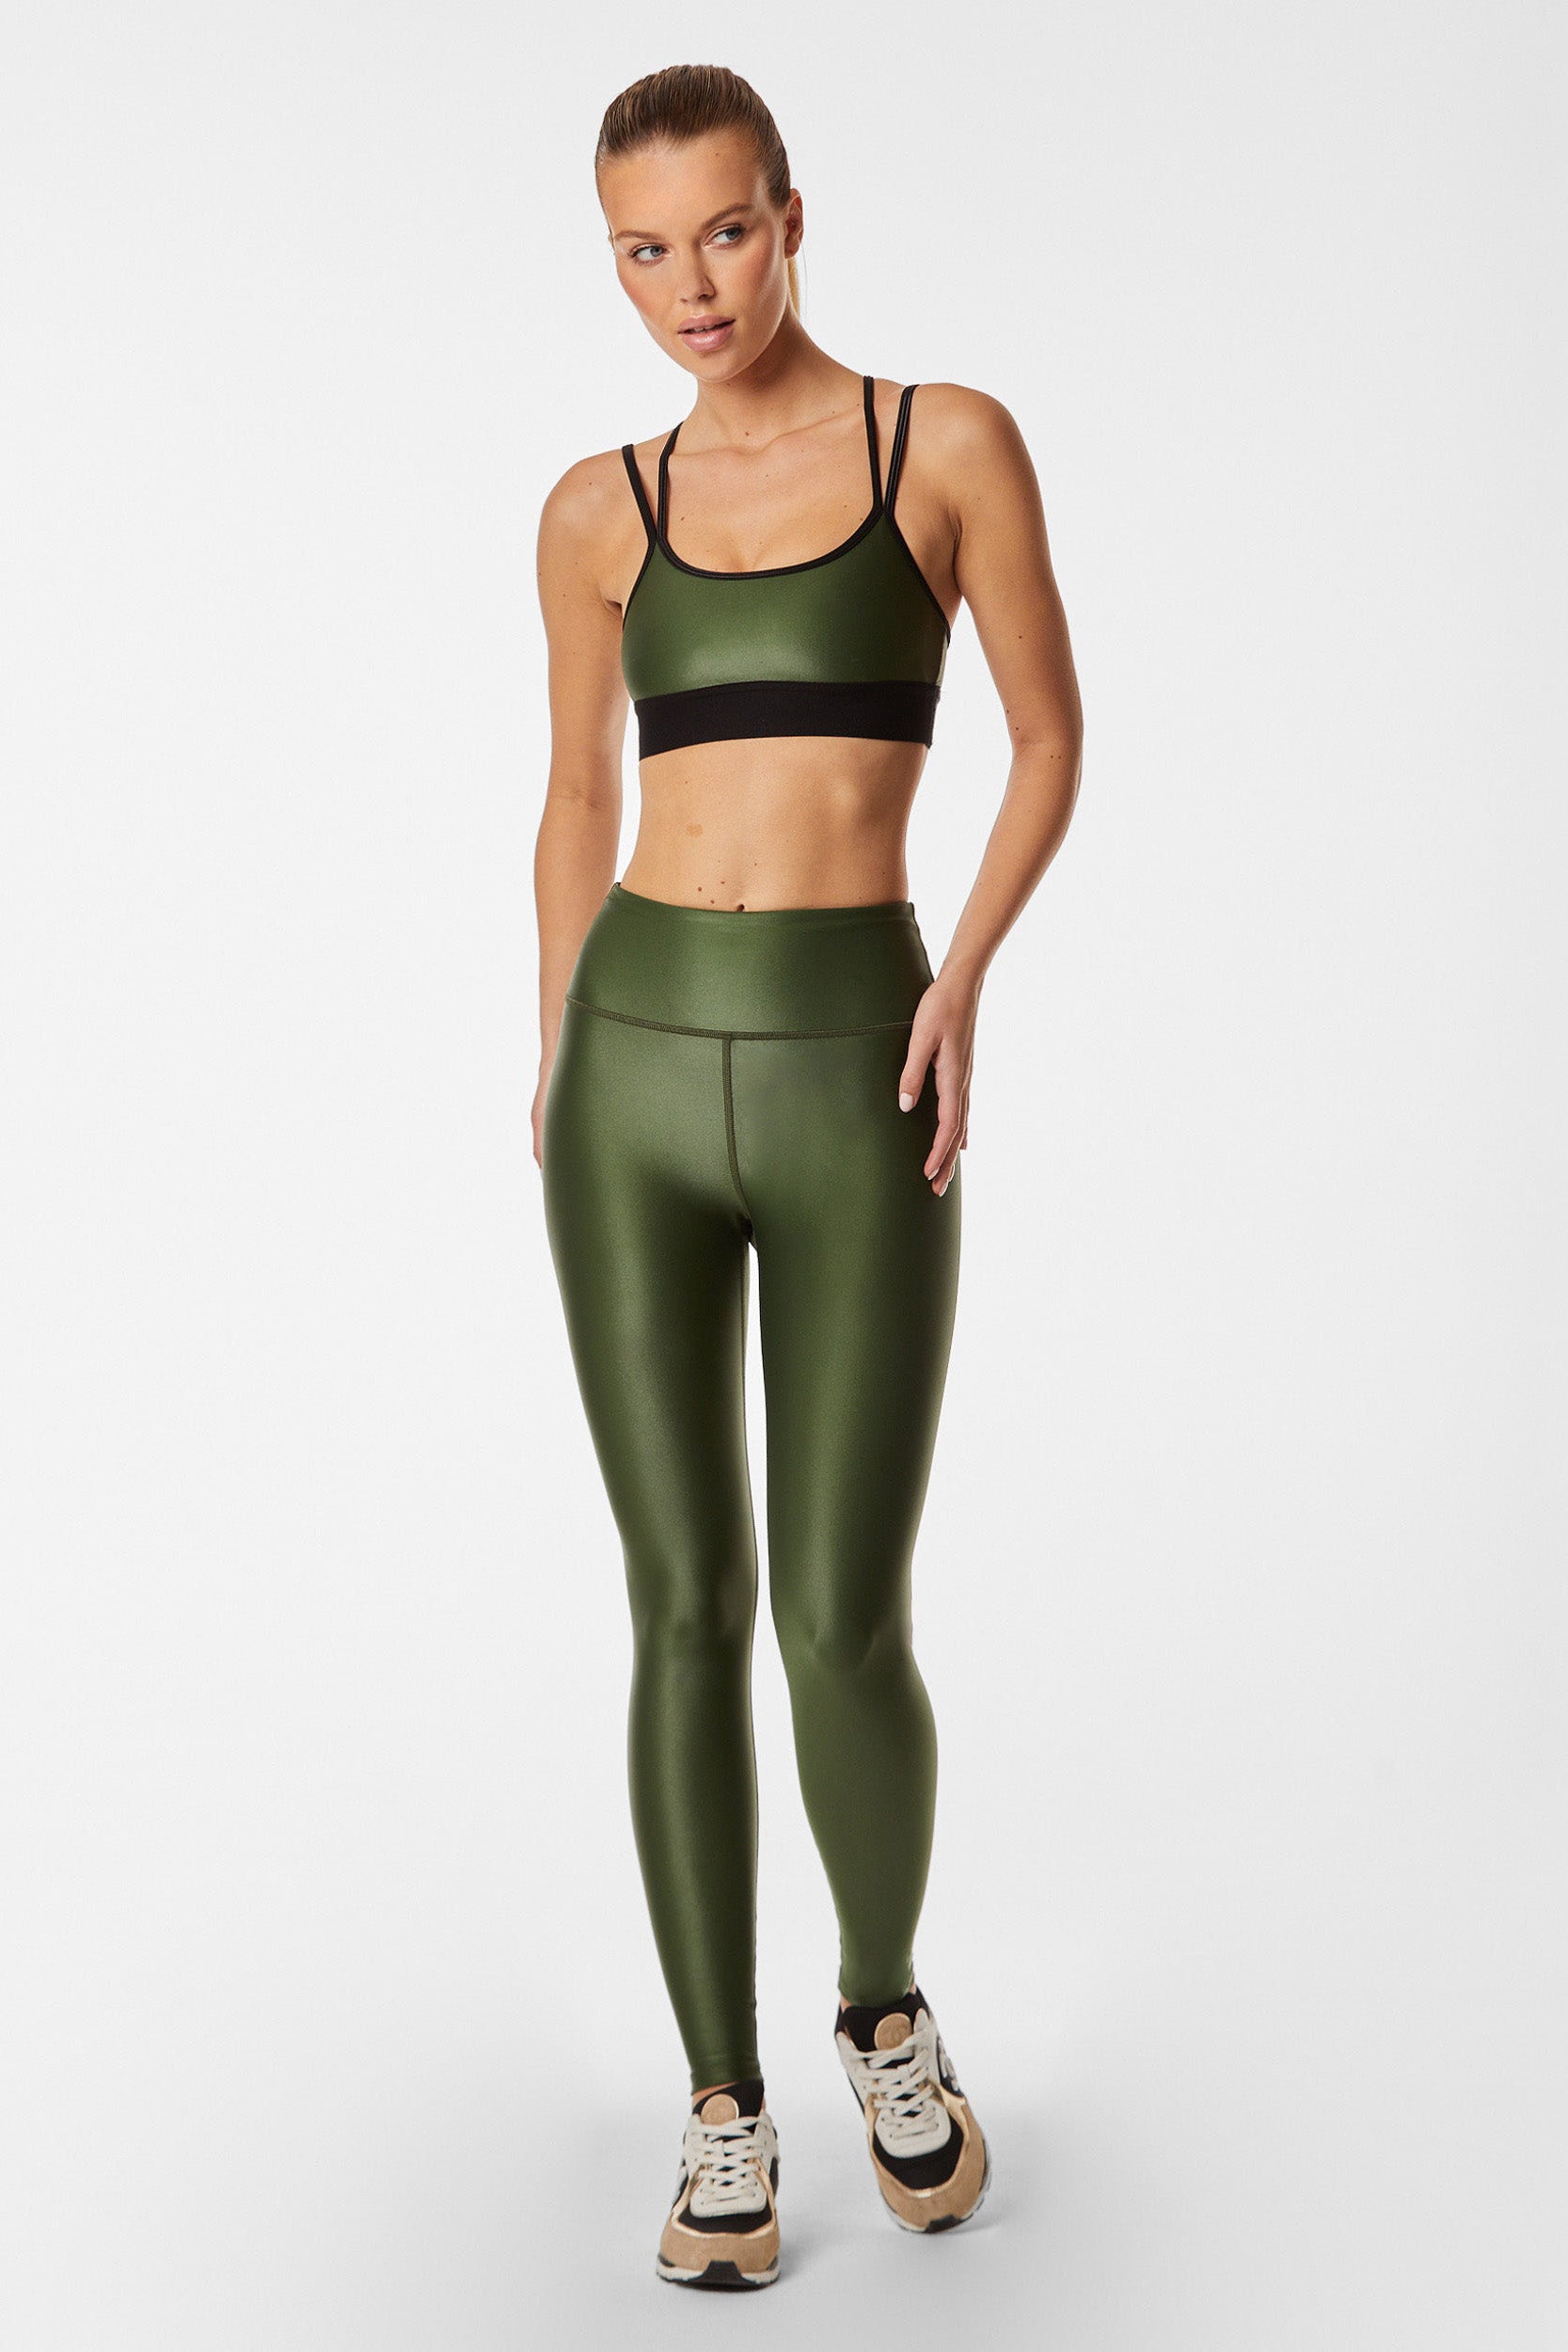 A person with light, tied-back hair is posing in a stylish ensemble featuring the Hunter Liquid Legging paired with a matching olive green sports bra accented by black straps. They are also wearing black and white sneakers. The background is plain white.